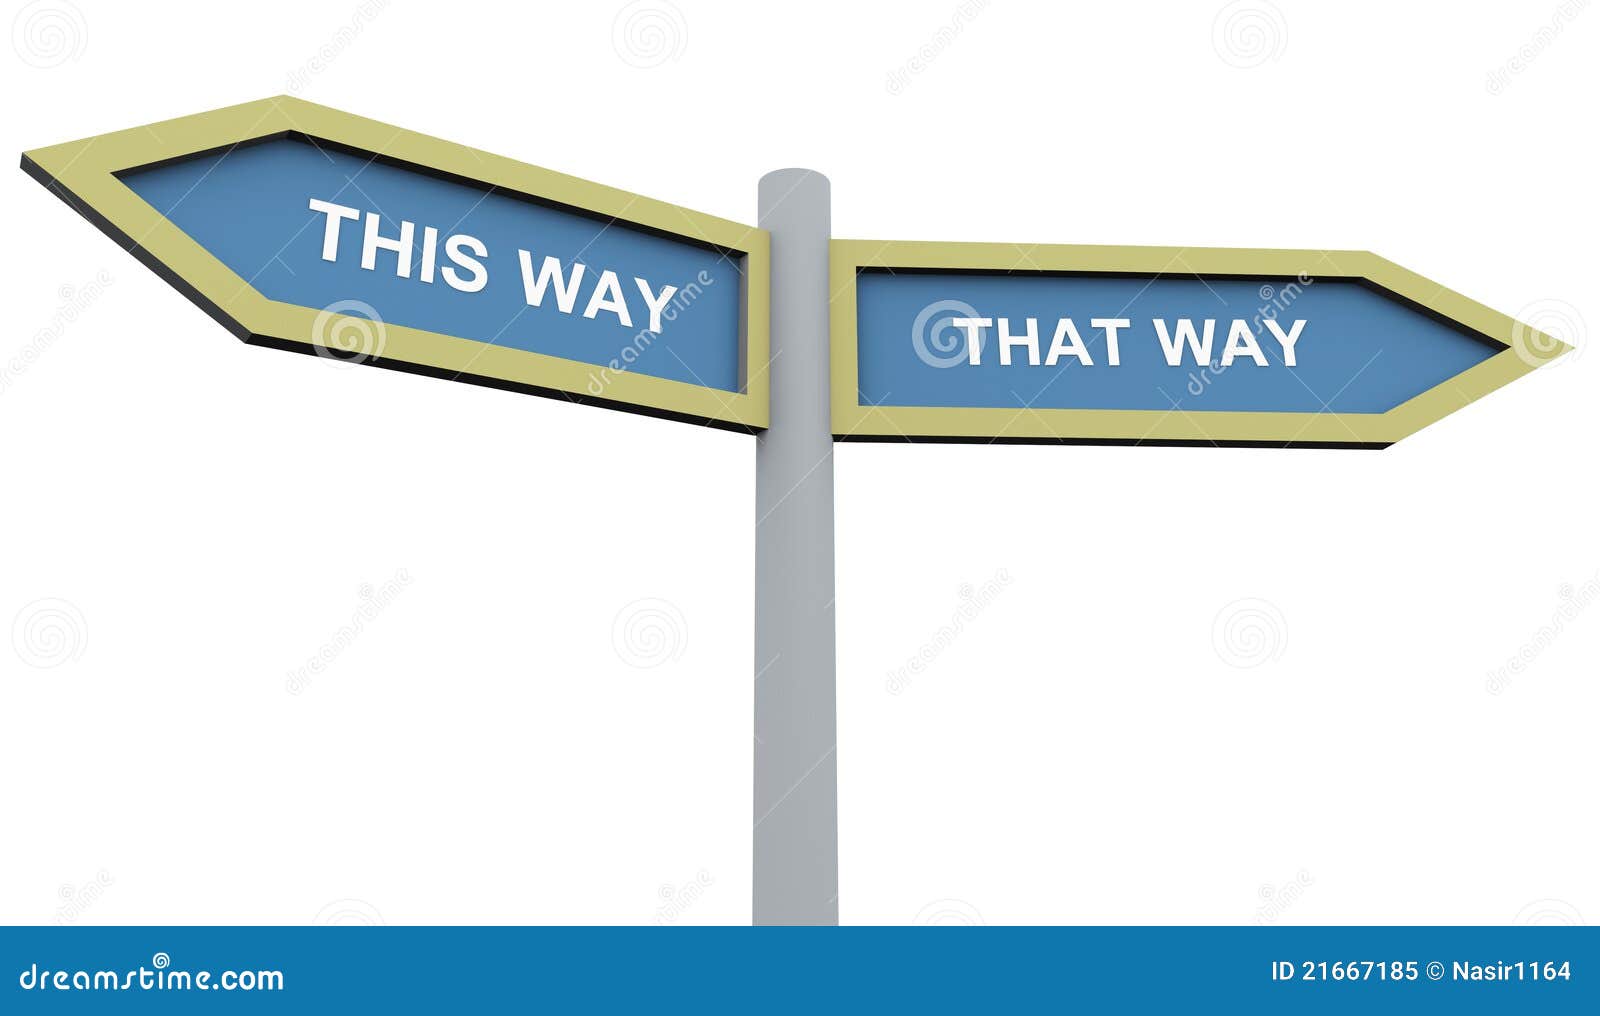 This way please. This way. This way or that way. Sign that way. Way illustration.